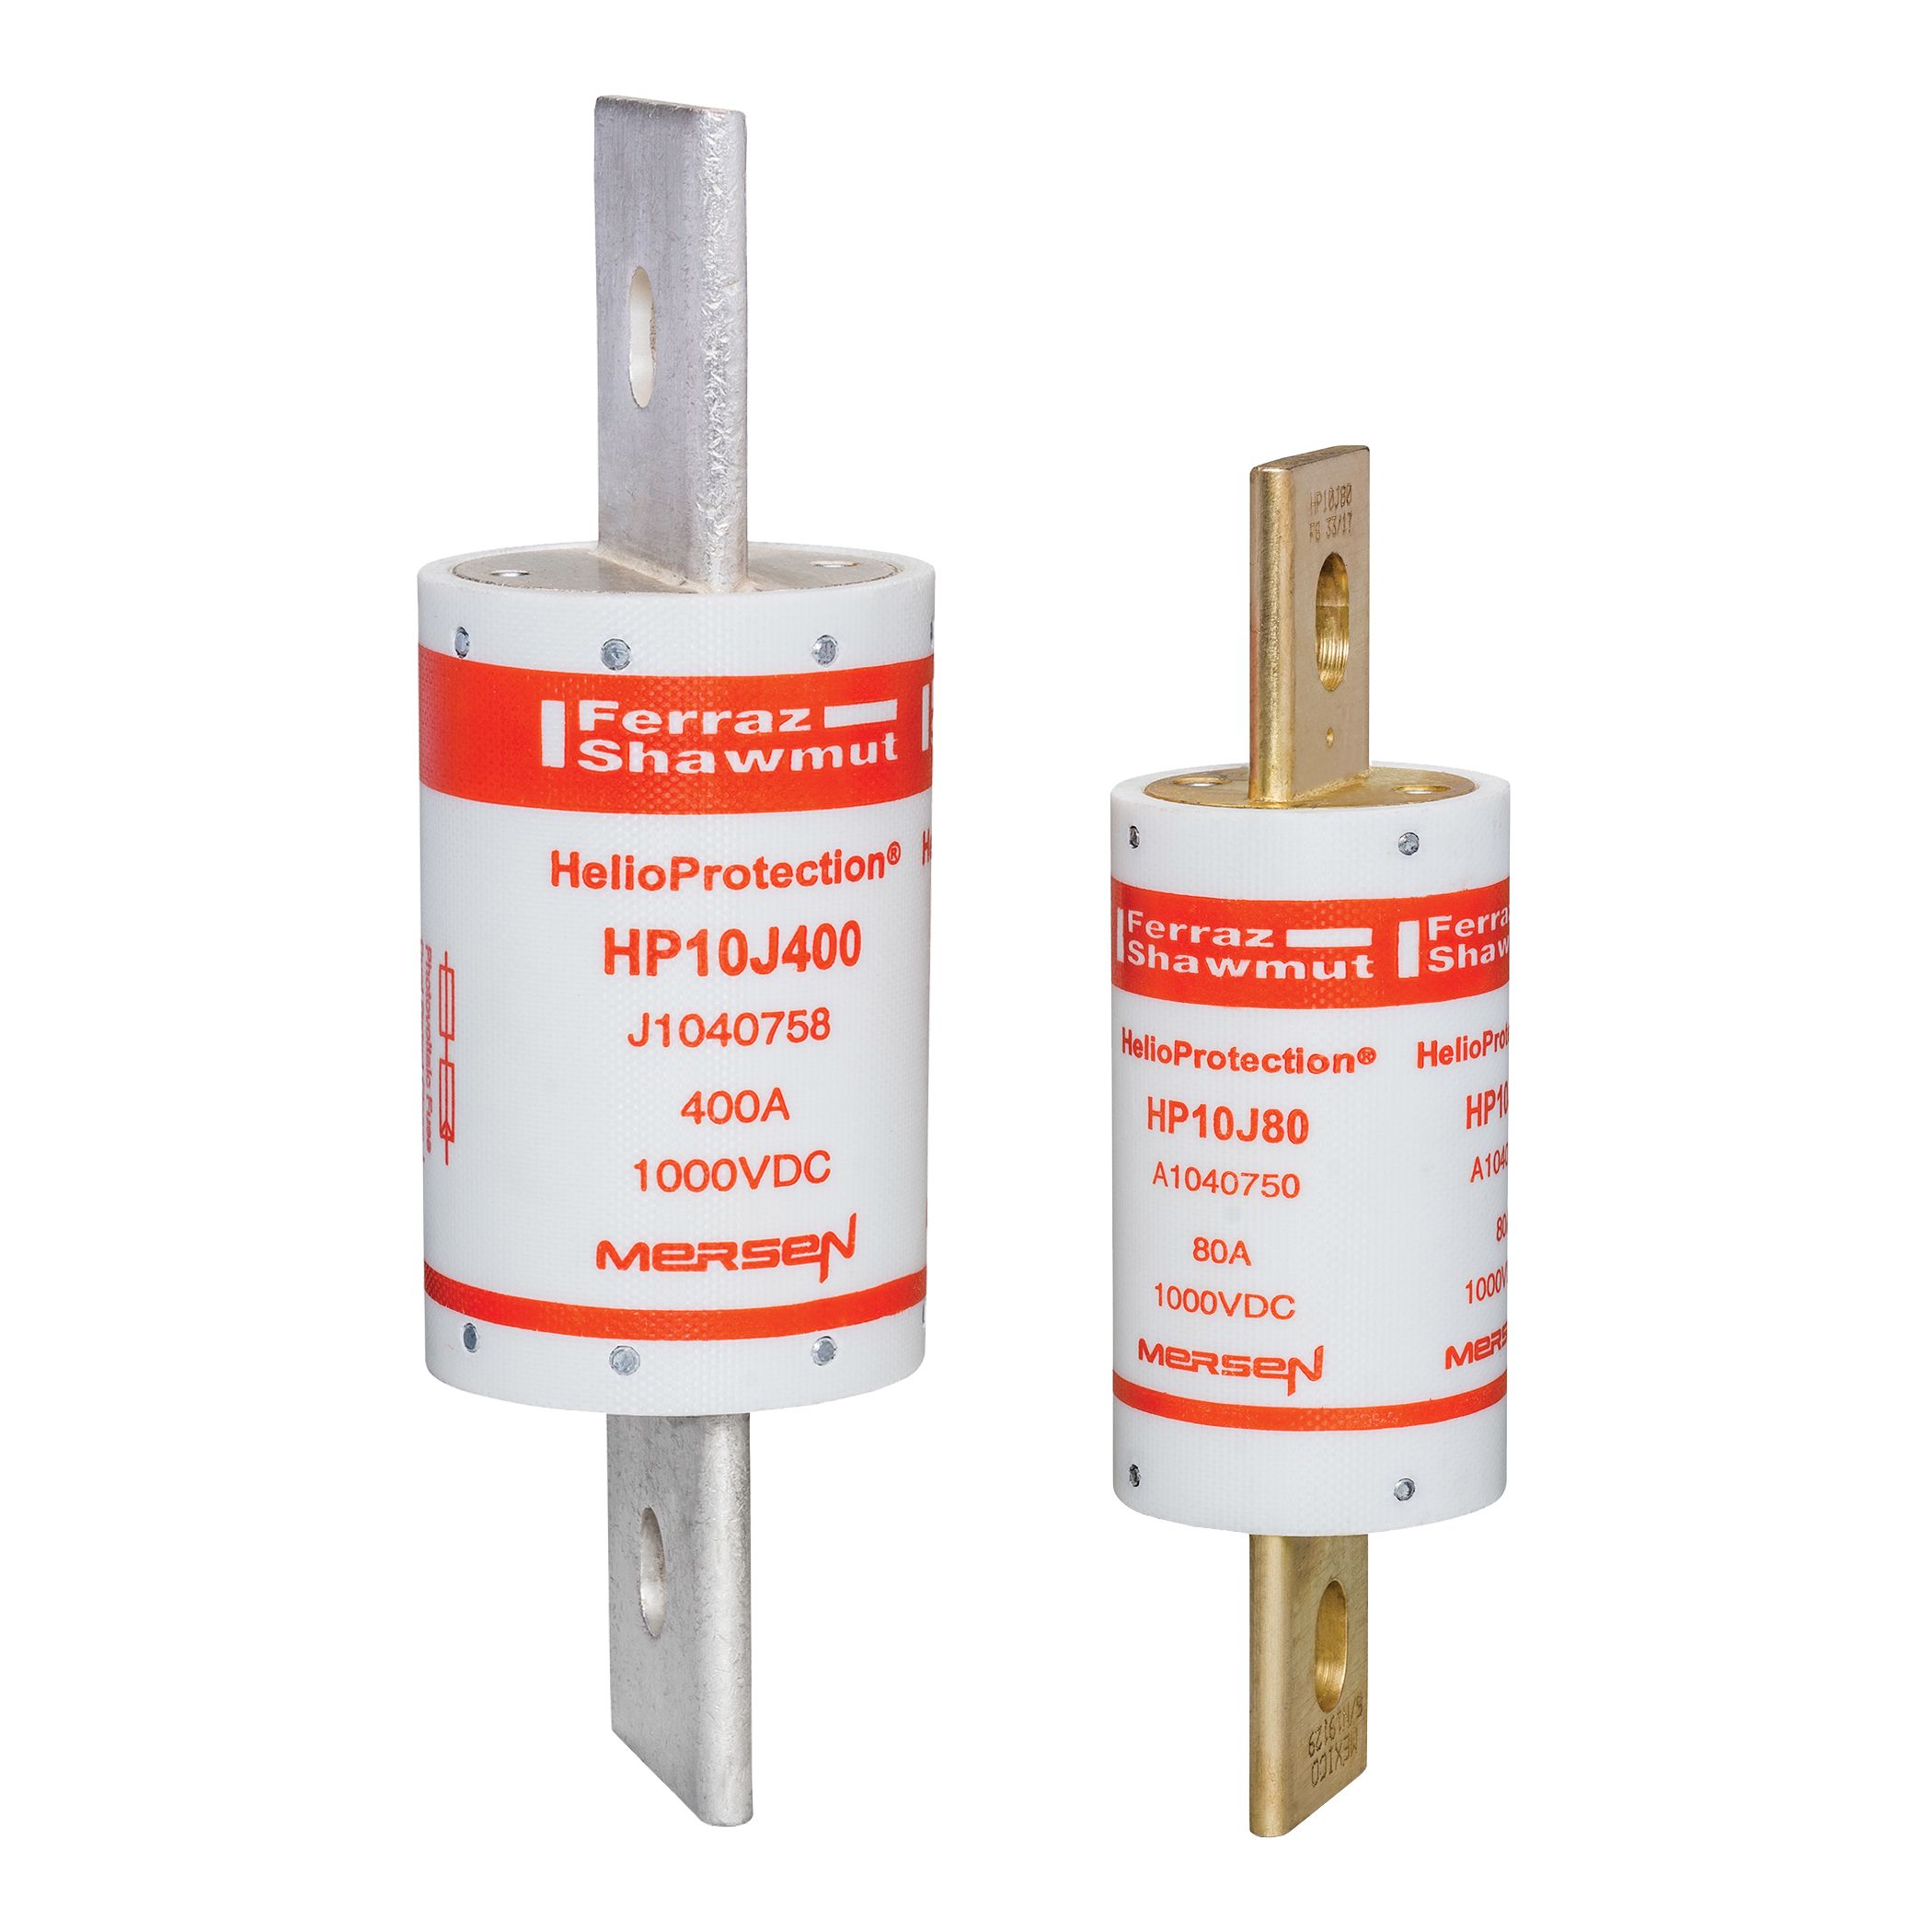 HP10J250 - HelioProtection® Fuse 1000VDC 250A gPV HP10J - Photovoltaic Series